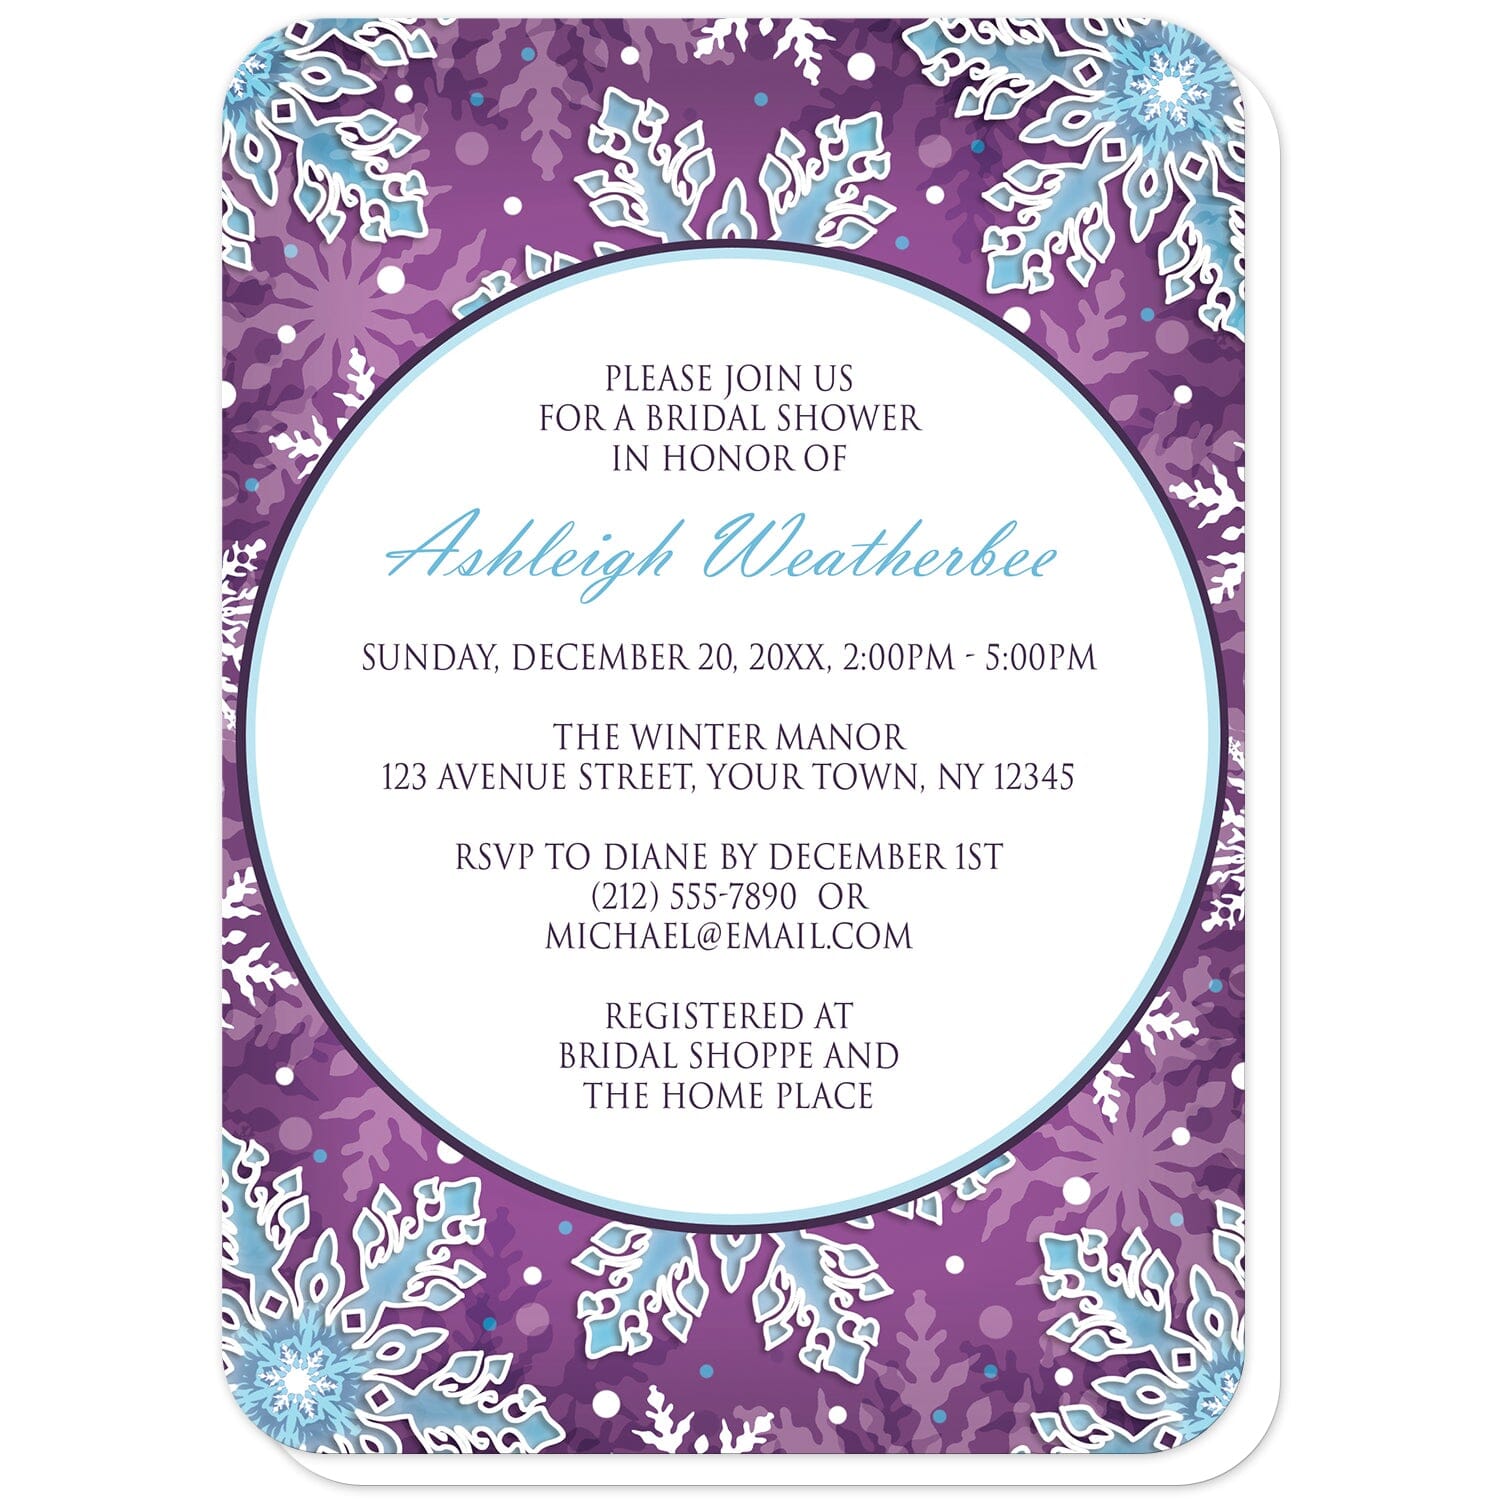 Modern Purple Blue Snowflake Bridal Shower Invitations (with rounded corners) at Artistically Invited. Modern purple blue snowflake bridal shower invitations with your personalized bridal shower celebration details custom printed in blue and purple in a white circle over a royal purple background covered in ornate white and blue snowflakes.